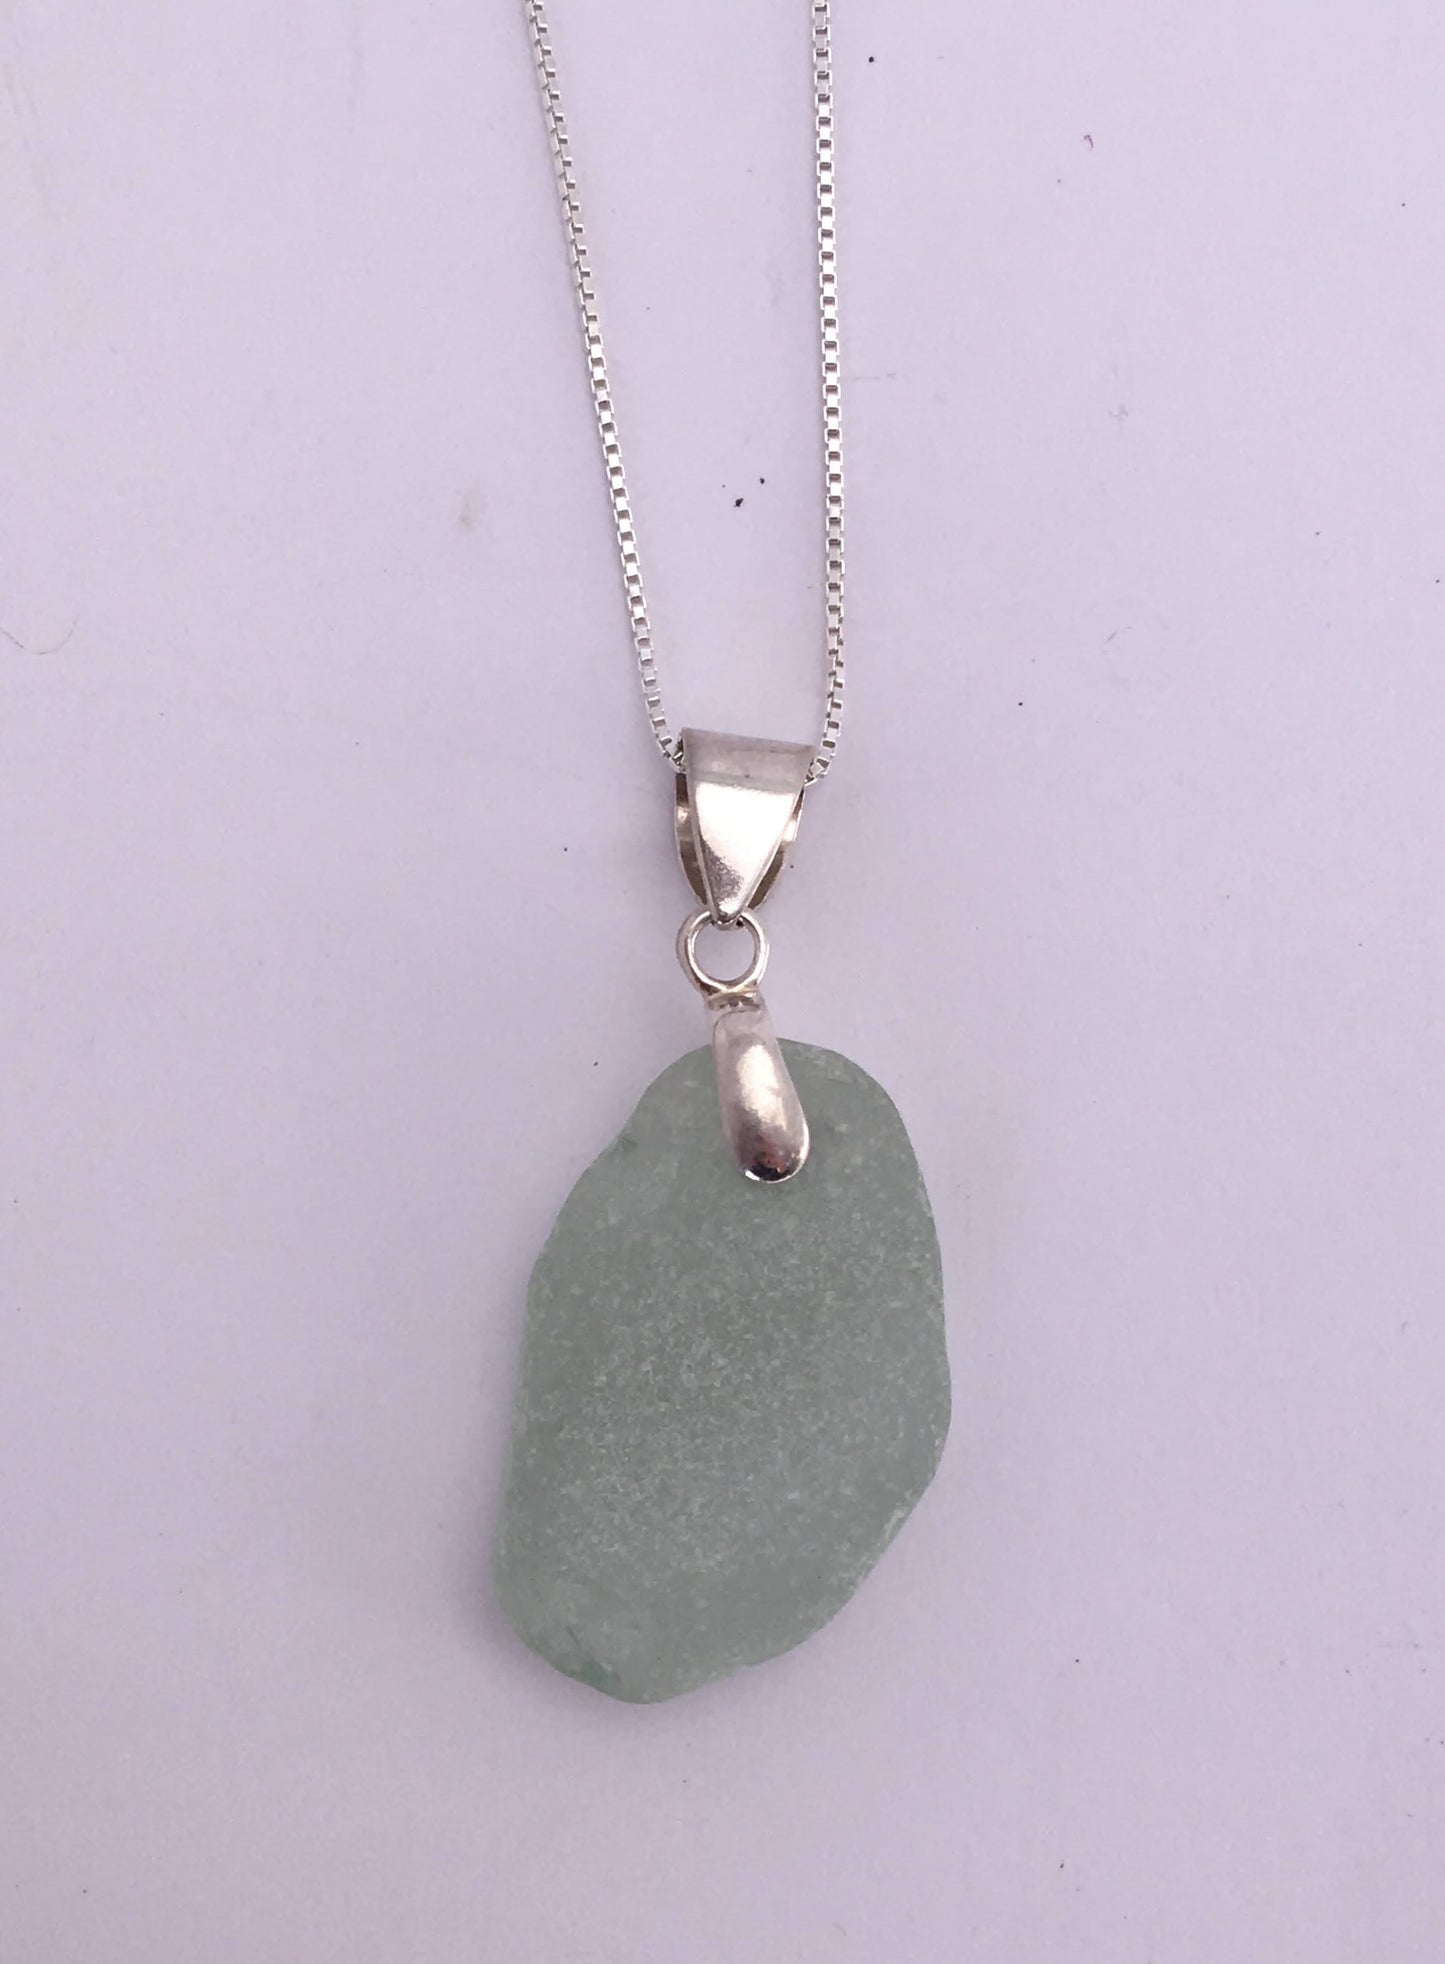 Shoreline Pendant - Pale aqua sea glass from Northern California with smooth triangular Sterling silver bail, on a boxchain